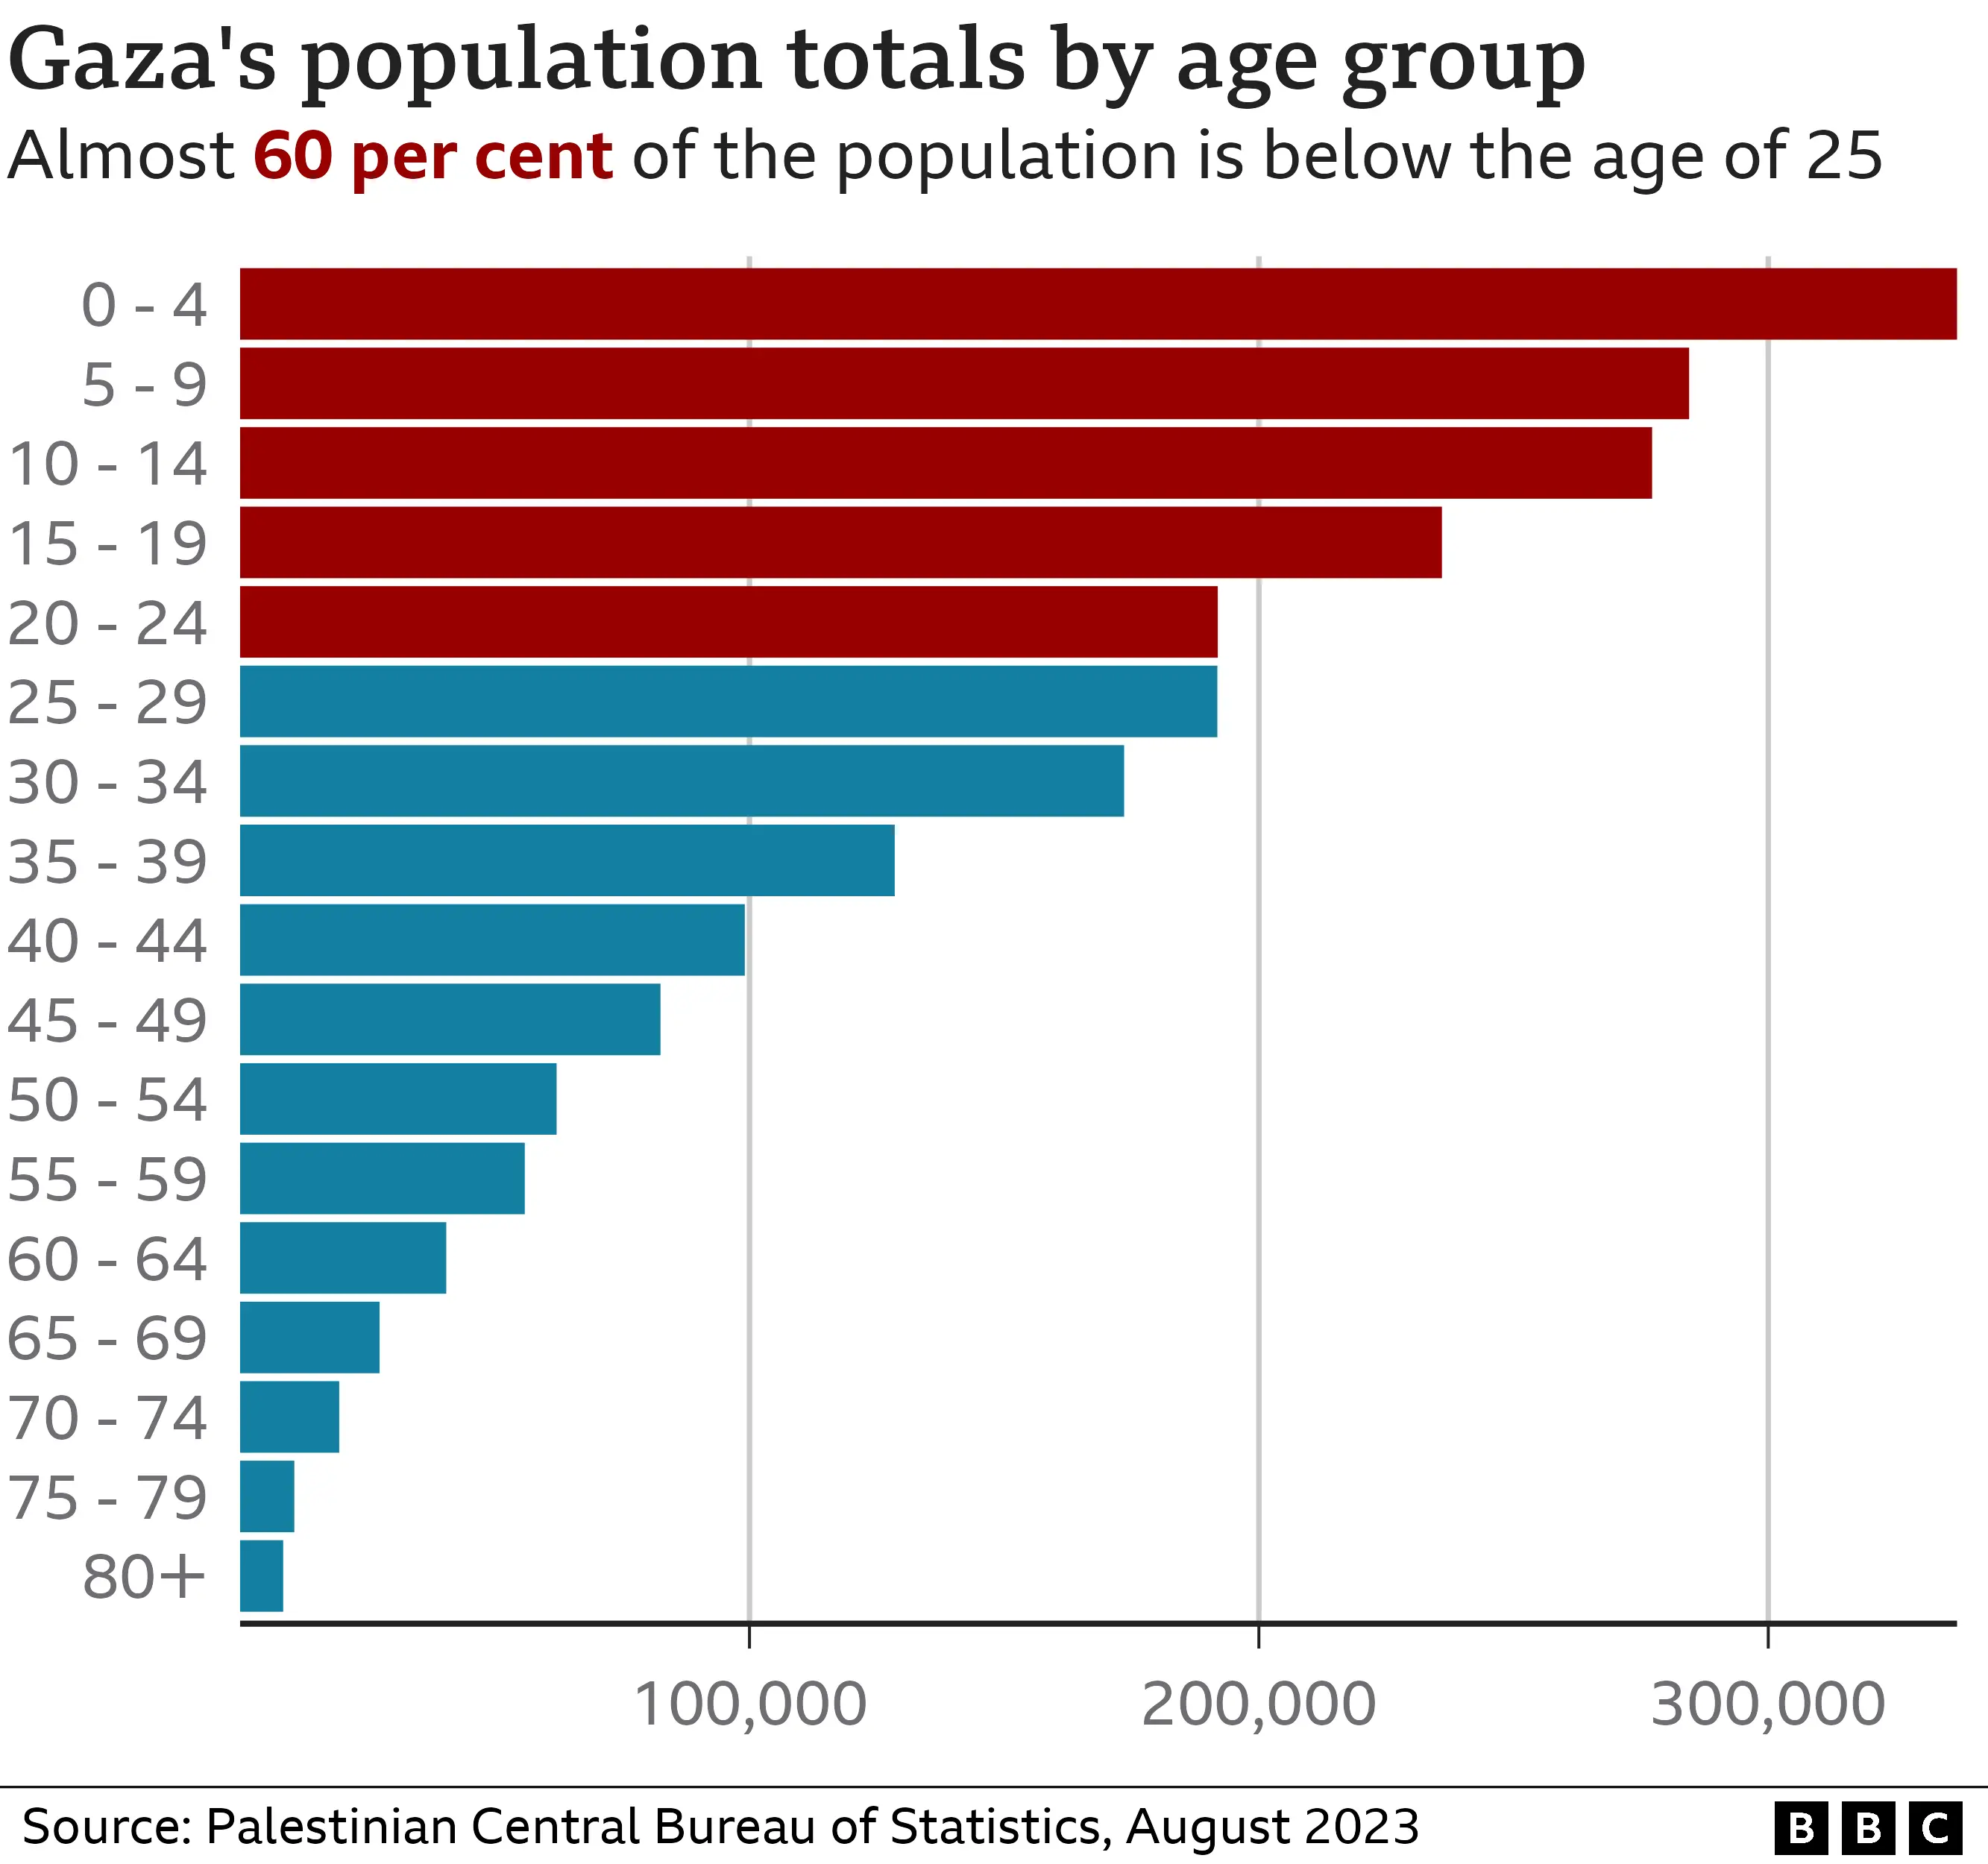 A chart showing the population of Gaza by age group. Gaza has a young population with almost 60% of the population under the age of 25